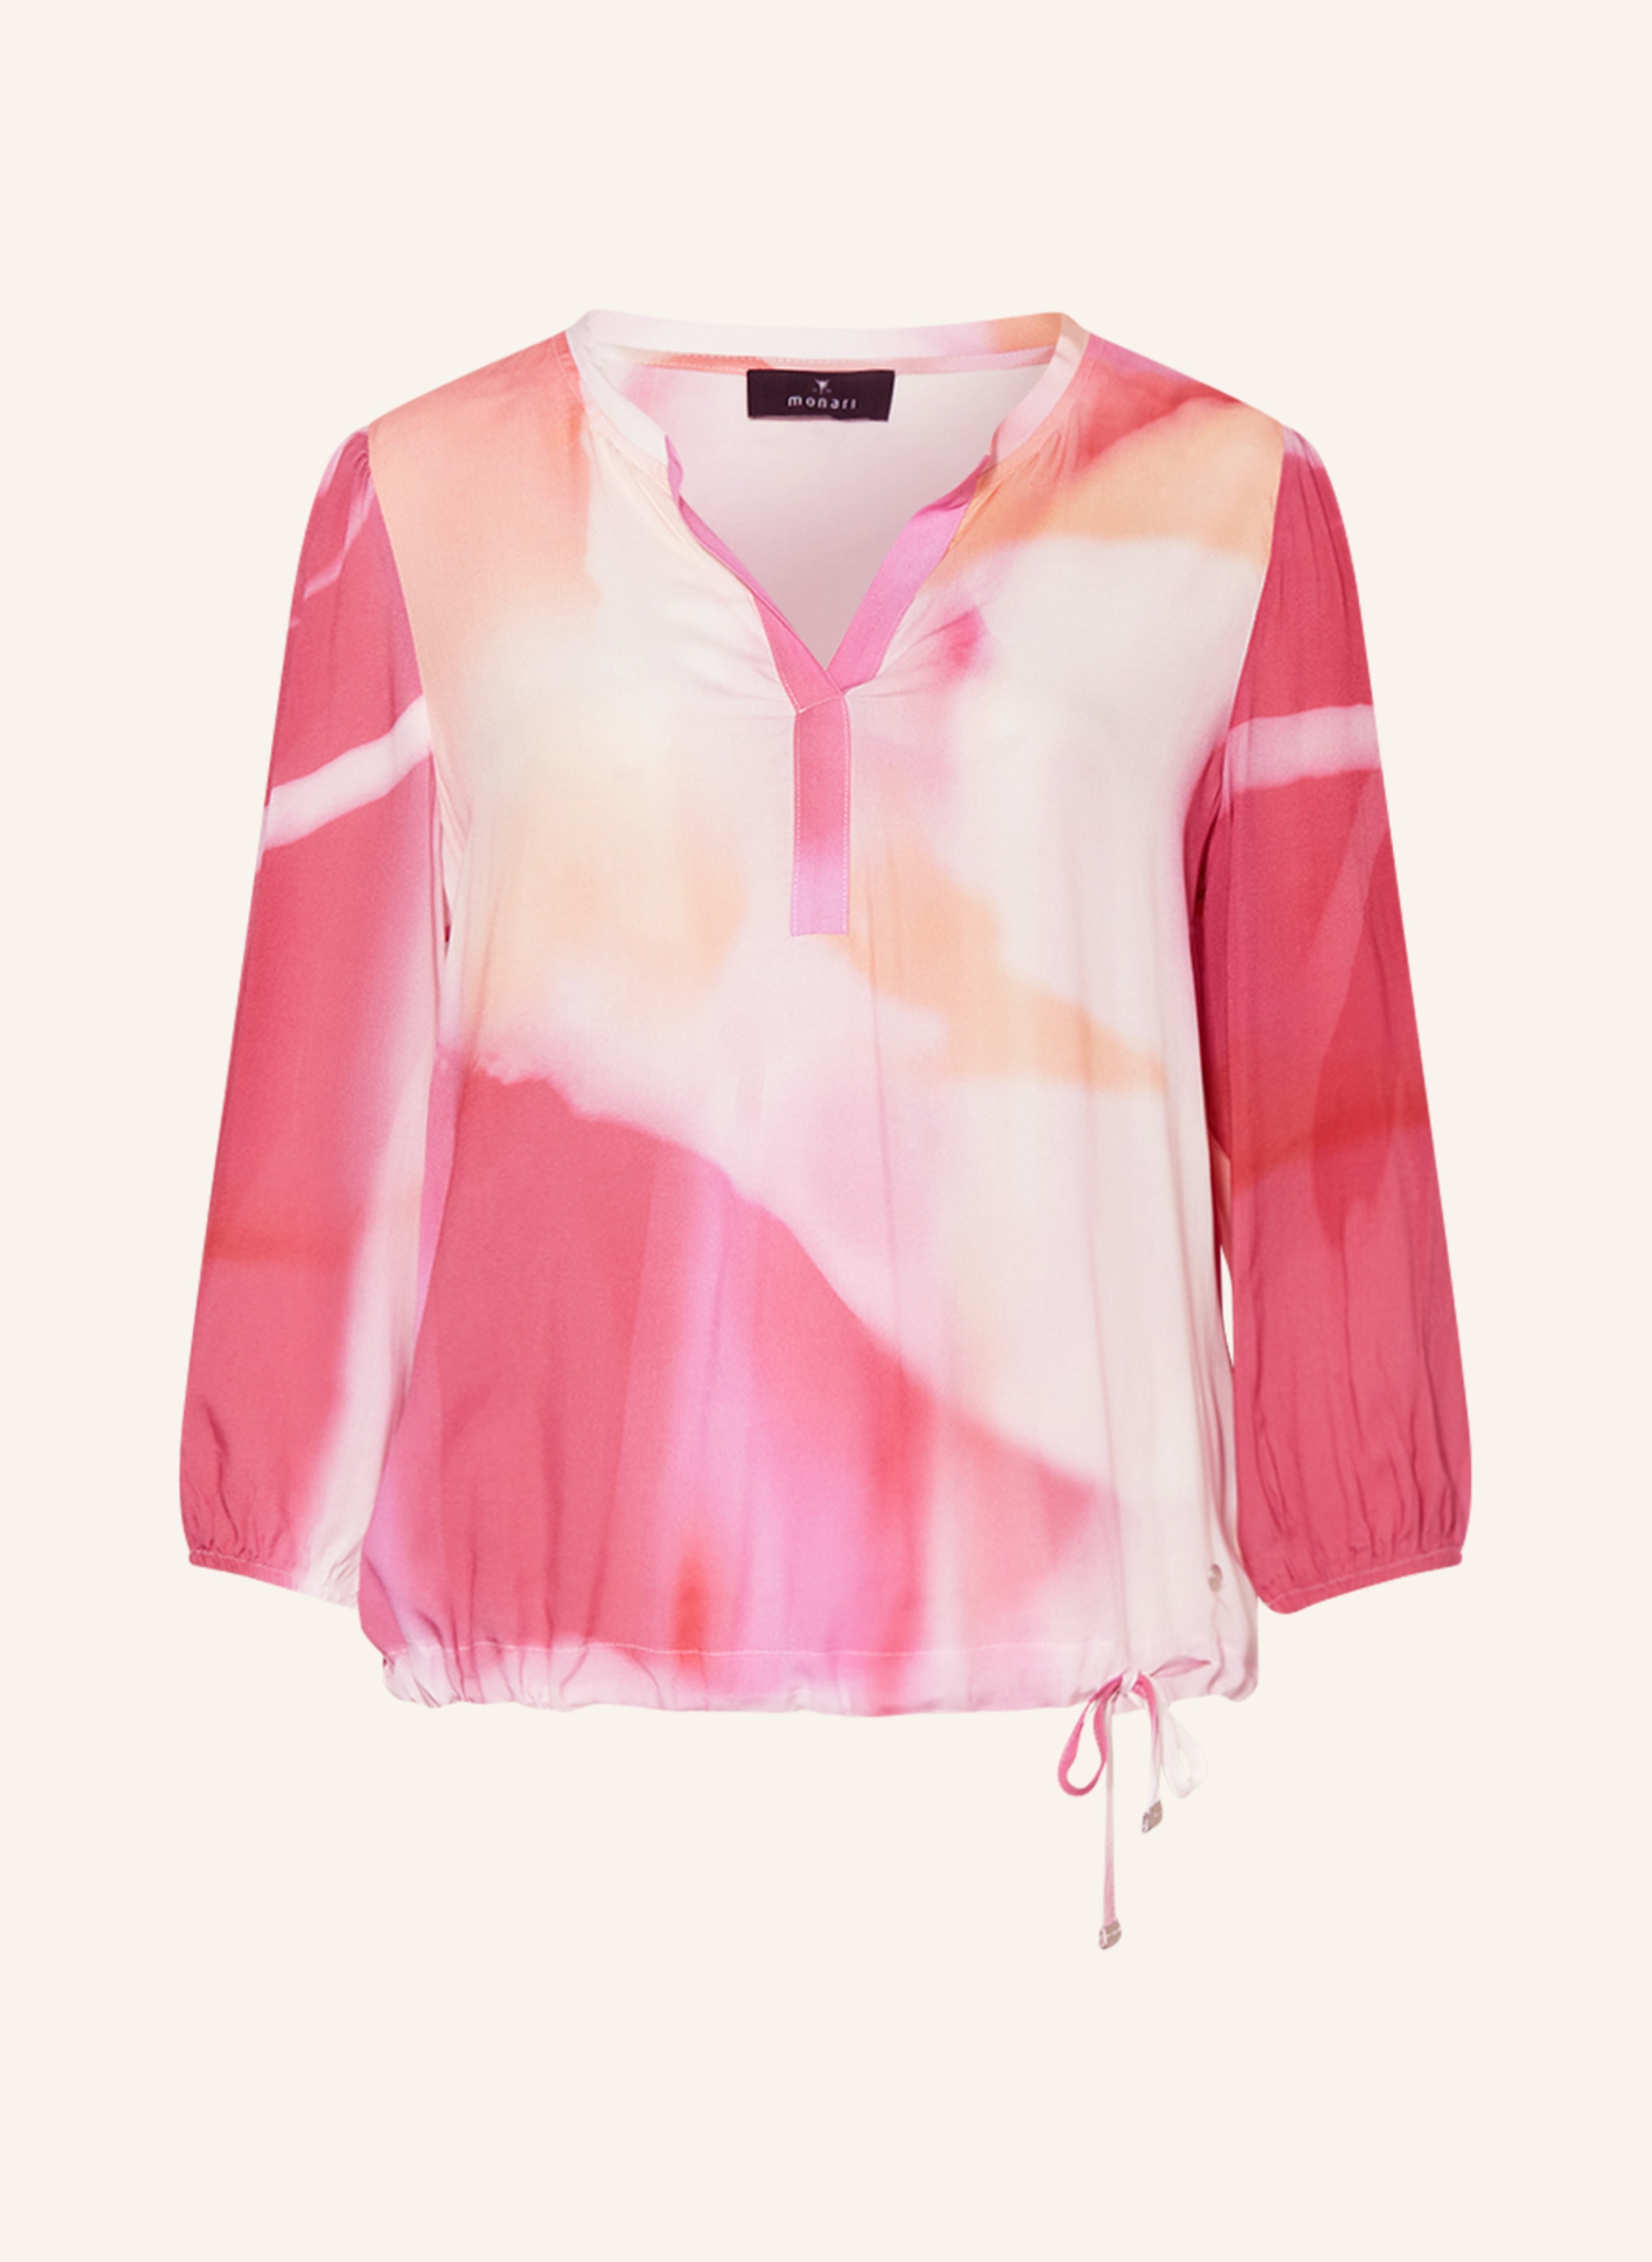 Blouse with 3/4 sleeves pink/ nude/ pink | Breuninger